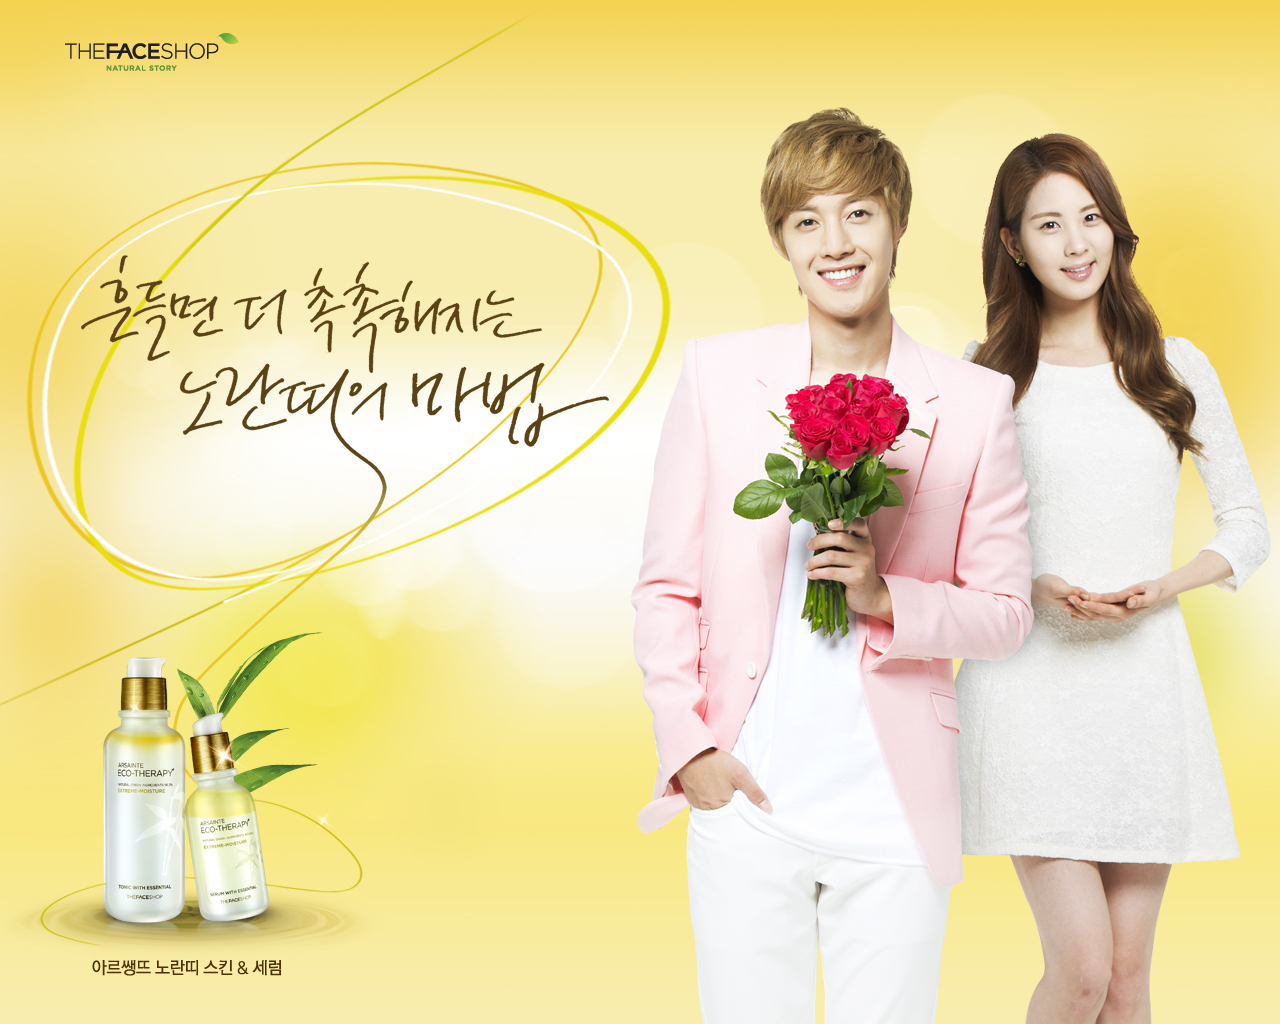 ... and Kim Hyun Joong's The Face Shop Wallpapers and Screensaver revealed